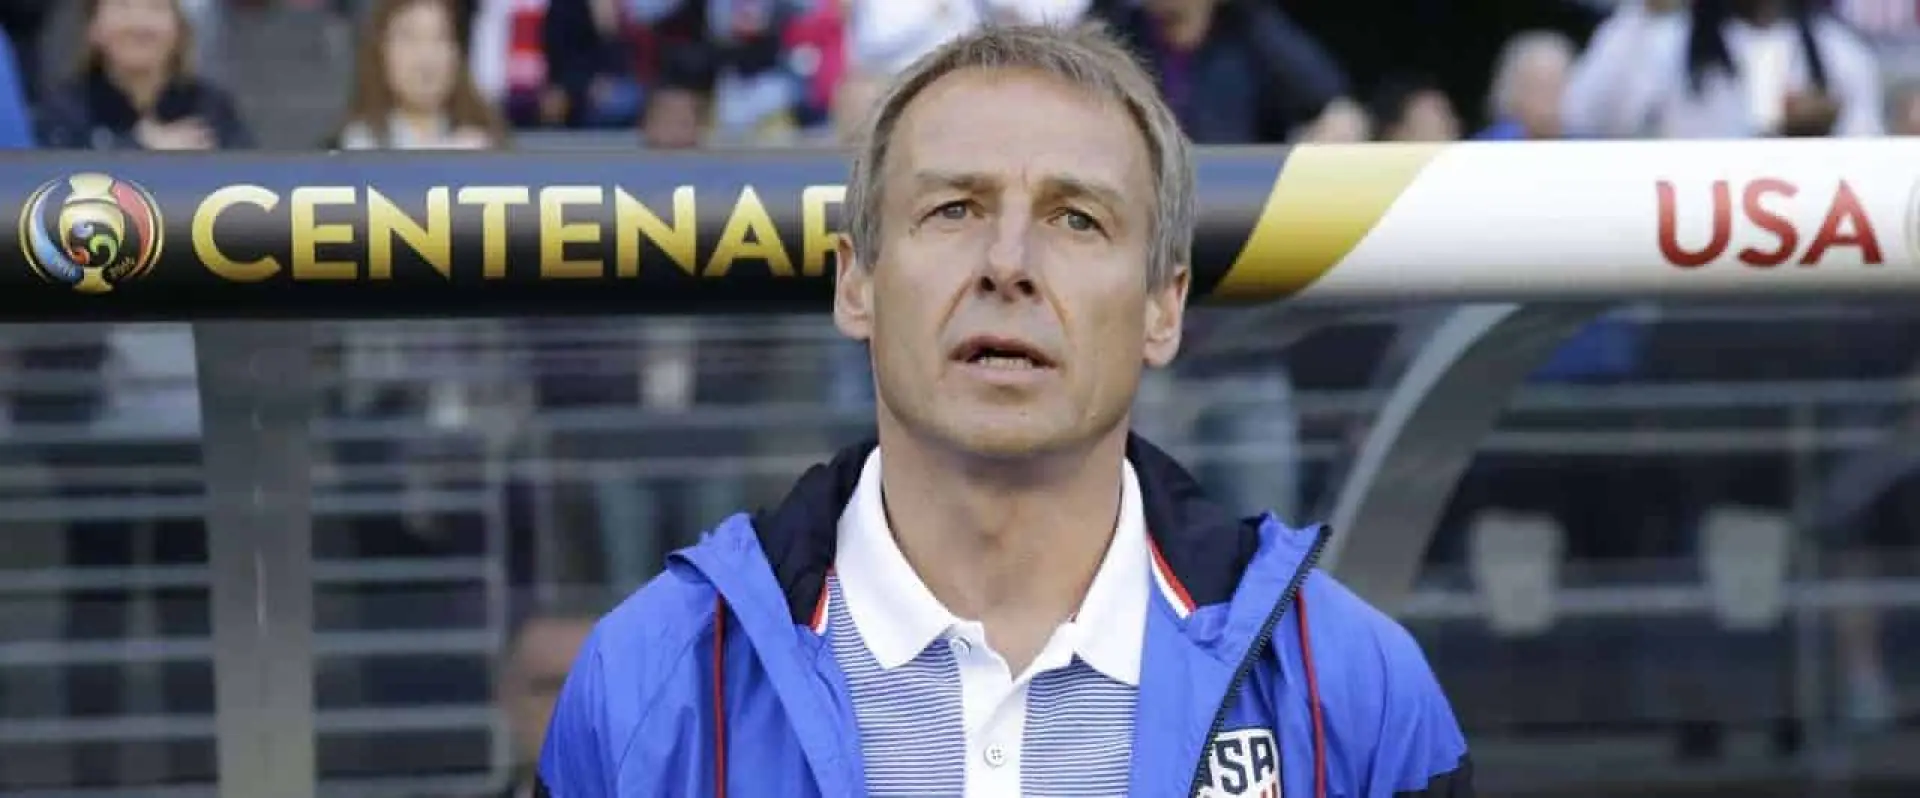 Jurgen Klinsmann odds have emerged as a real value punt among next England manager tips, despite Gareth Southgate getting an interview for the role permanently.